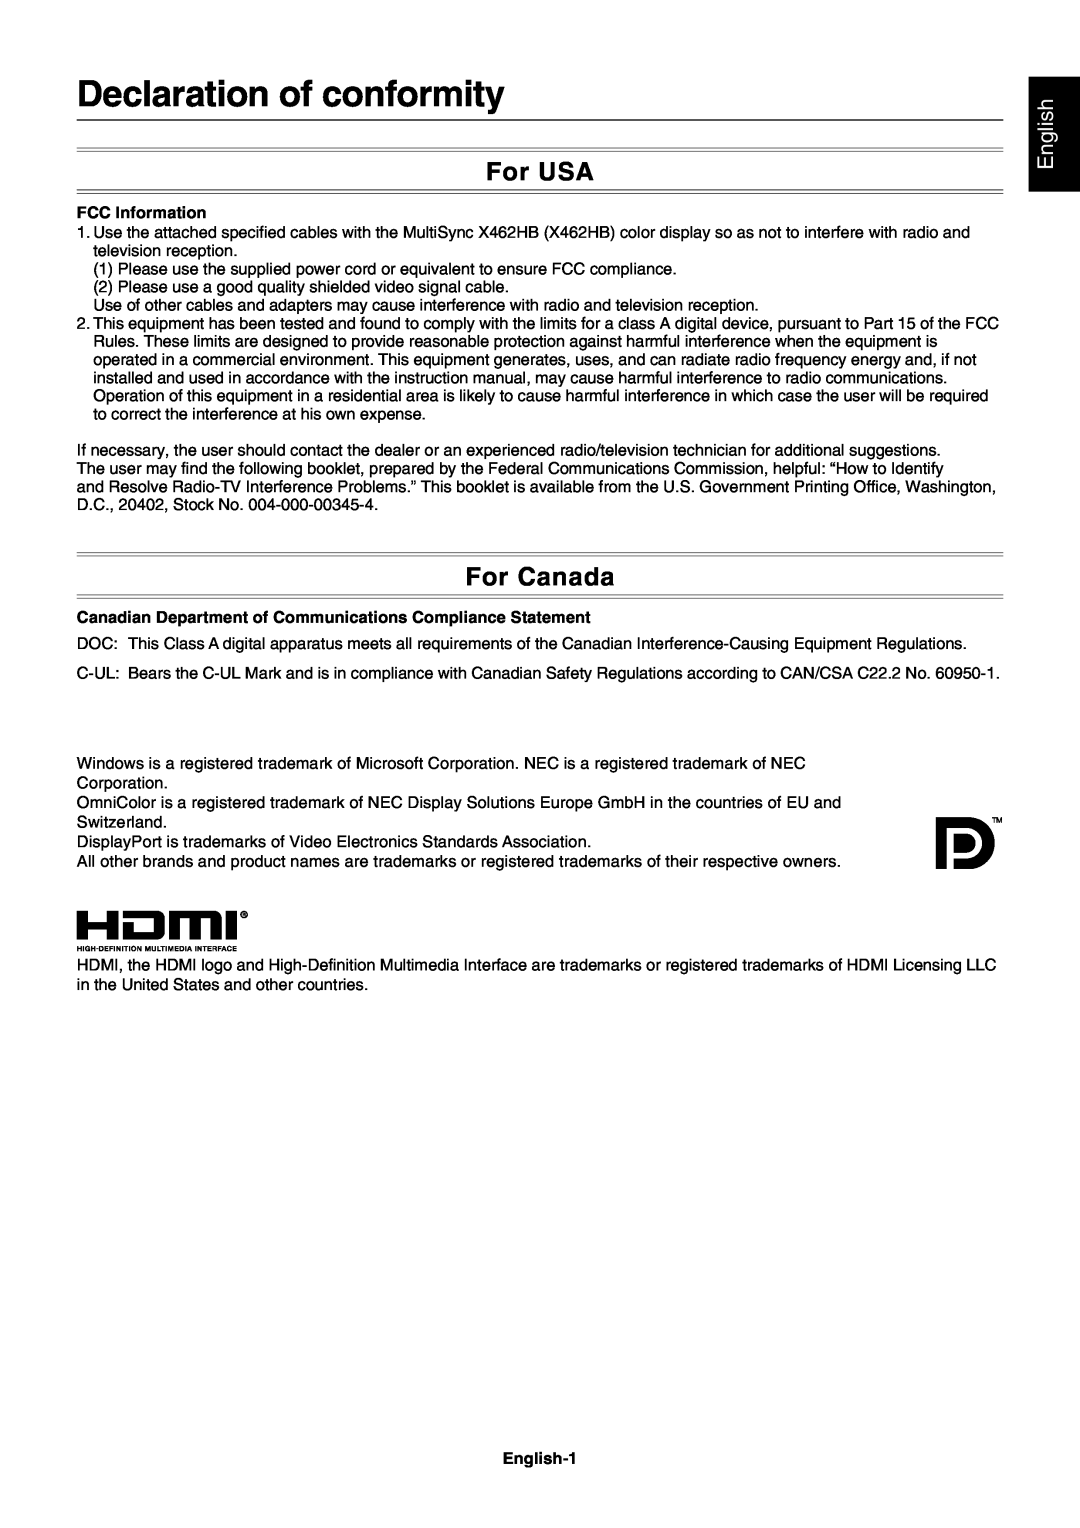 NEC MULTISYNC X462HB user manual Declaration of conformity, For USA, For Canada, English 